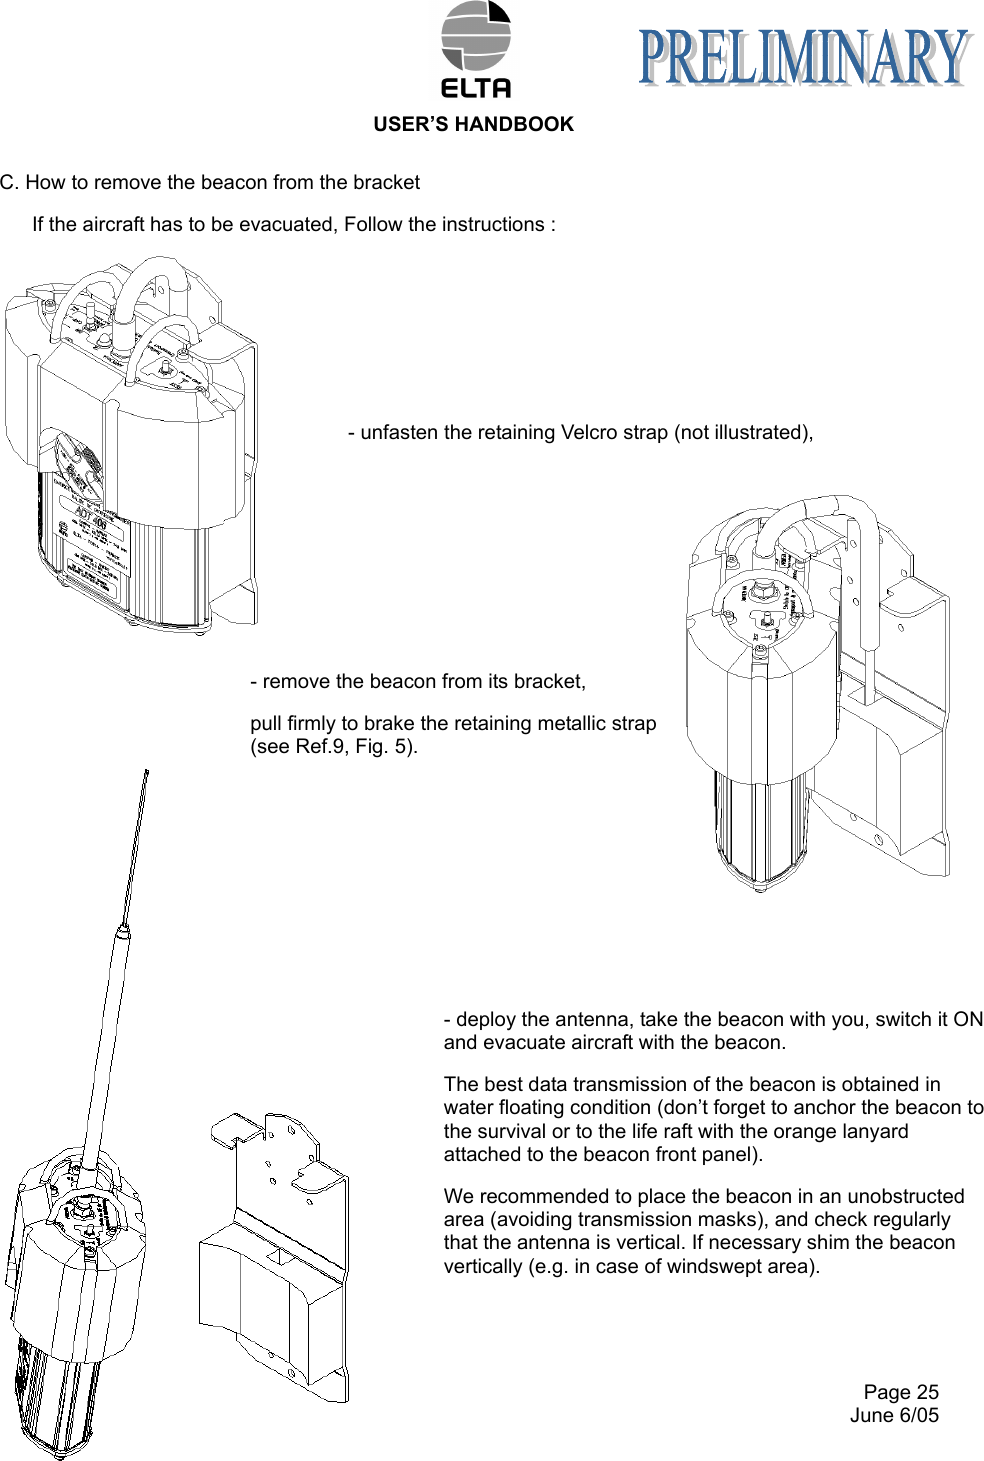  USER’S HANDBOOK     Page 25   June 6/05 C. How to remove the beacon from the bracket If the aircraft has to be evacuated, Follow the instructions :     - unfasten the retaining Velcro strap (not illustrated),      - remove the beacon from its bracket, pull firmly to brake the retaining metallic strap (see Ref.9, Fig. 5).           - deploy the antenna, take the beacon with you, switch it ON and evacuate aircraft with the beacon. The best data transmission of the beacon is obtained in water floating condition (don’t forget to anchor the beacon to the survival or to the life raft with the orange lanyard attached to the beacon front panel). We recommended to place the beacon in an unobstructed area (avoiding transmission masks), and check regularly that the antenna is vertical. If necessary shim the beacon vertically (e.g. in case of windswept area). 